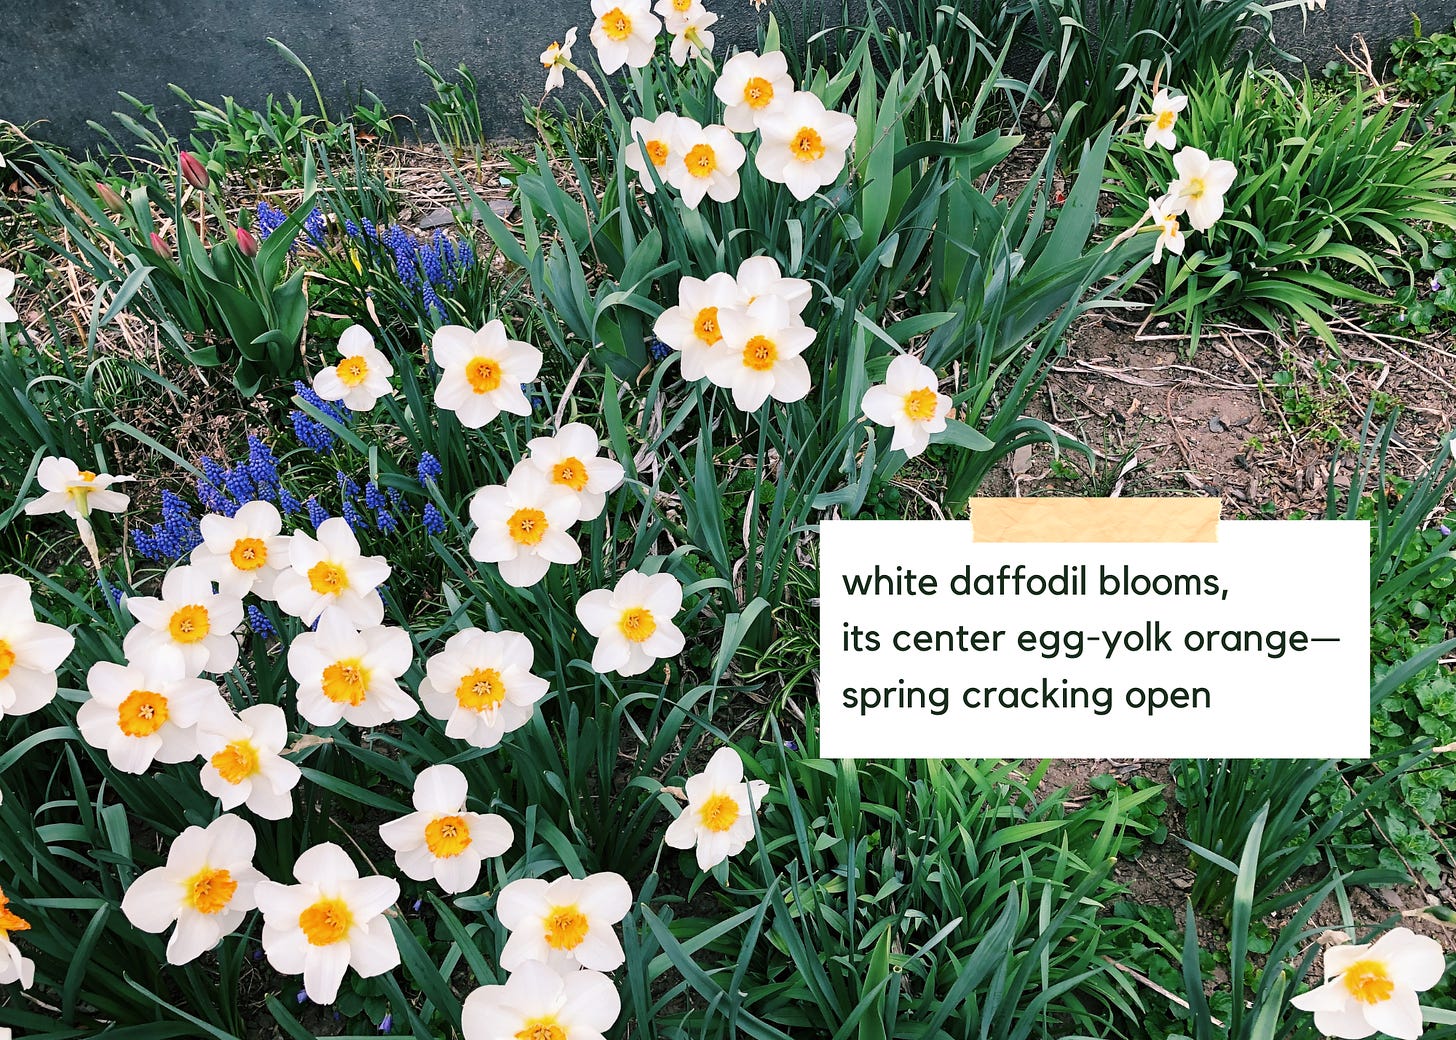 Photo of daffodils blooming. Text reads: white daffodil blooms, / its center egg-yolk orange– / spring cracking open"